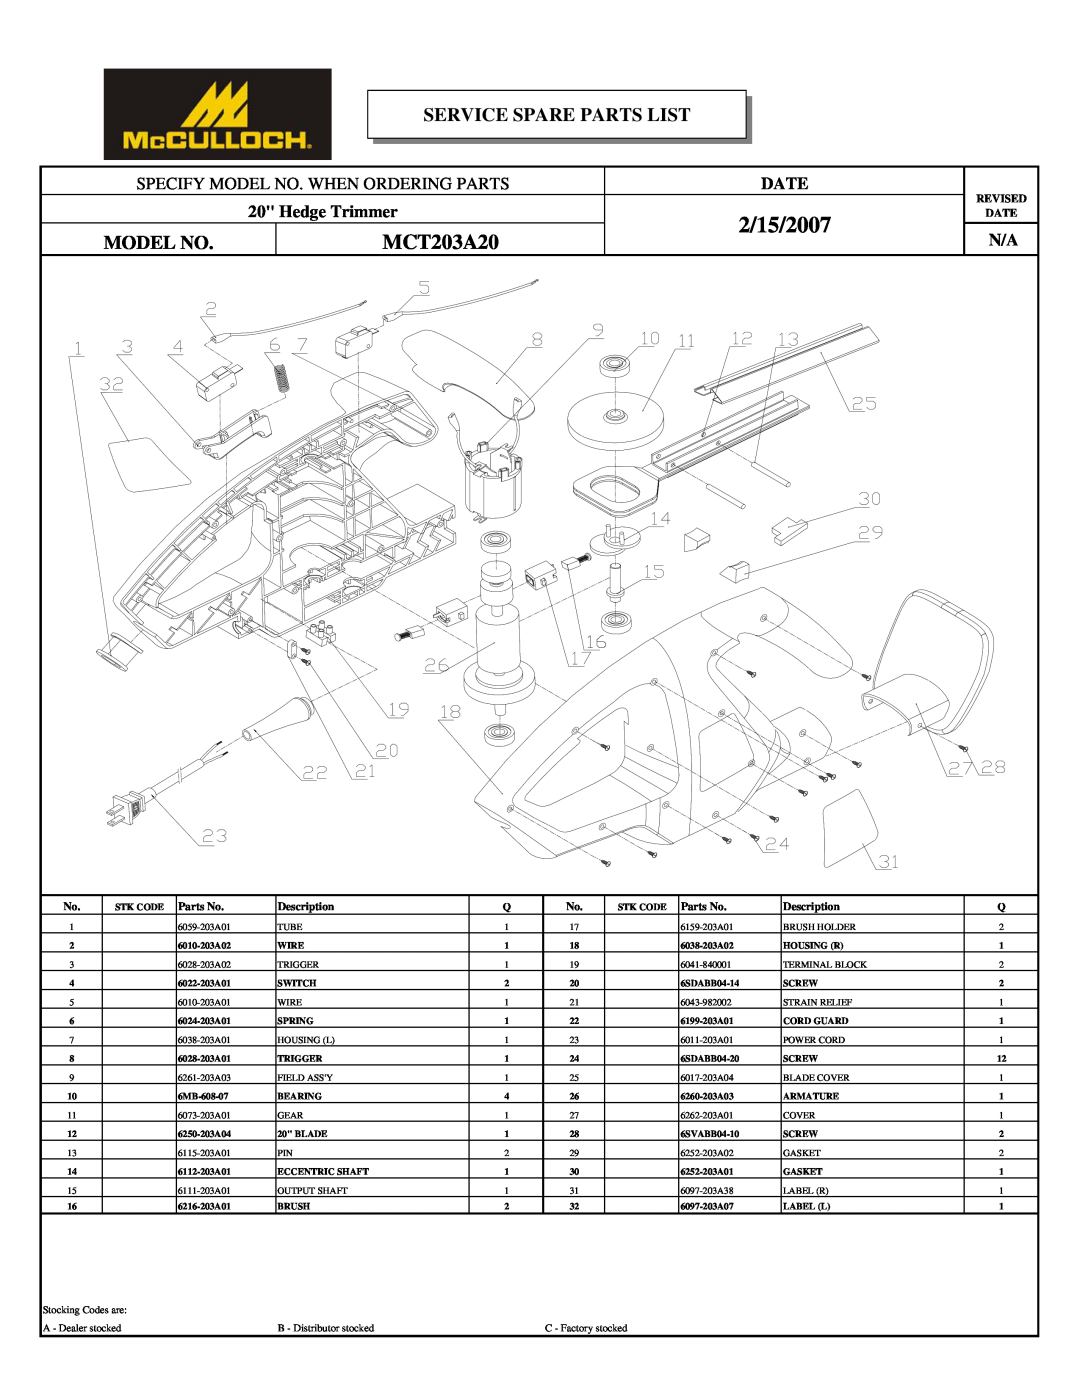 McCulloch 6096-203A12 2/15/2007, MCT203A20, Service Spare Parts List, Specify Model No. When Ordering Parts, Date 